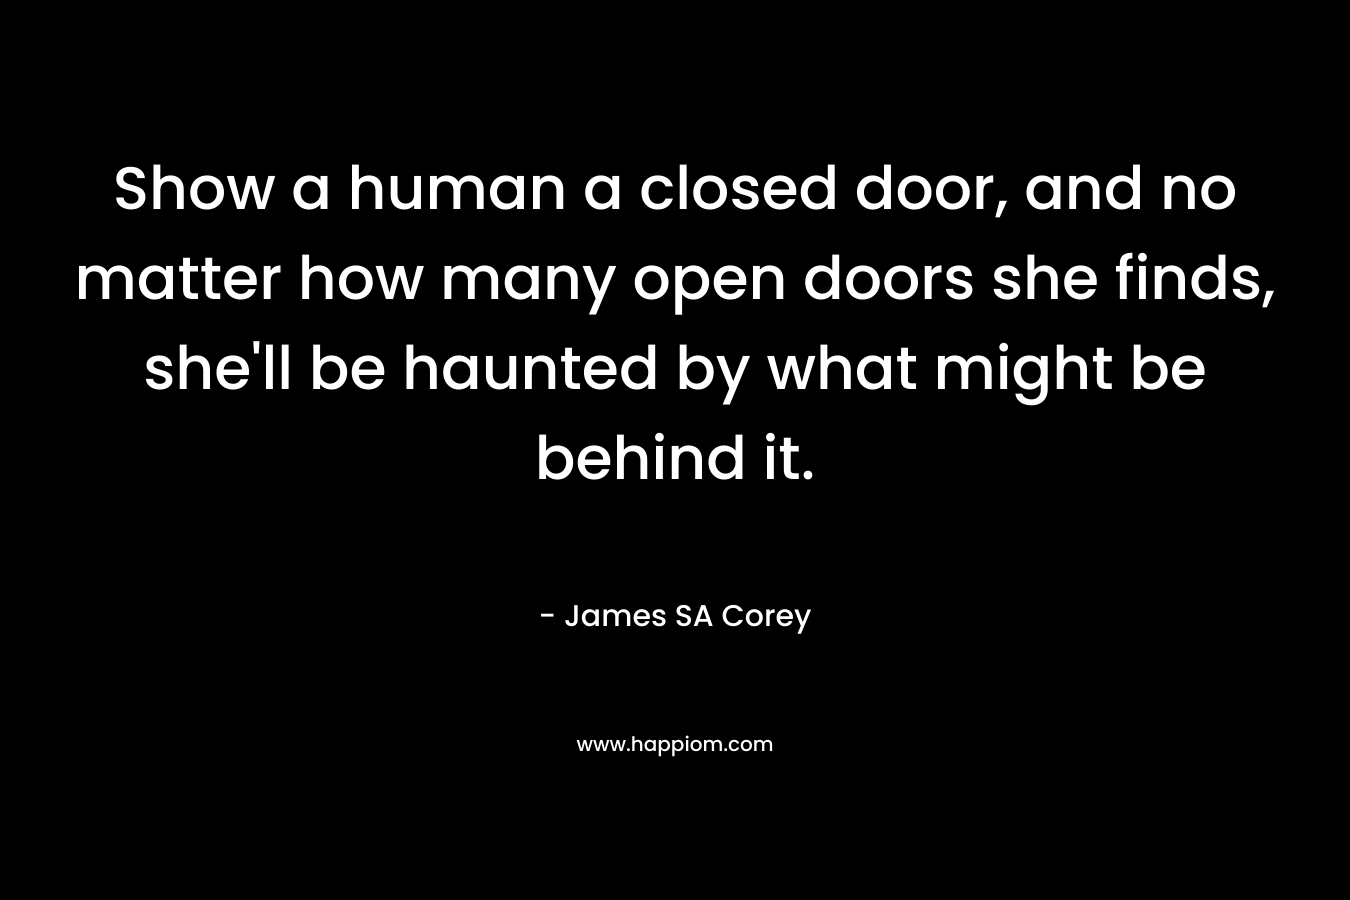 Show a human a closed door, and no matter how many open doors she finds, she’ll be haunted by what might be behind it. – James SA Corey